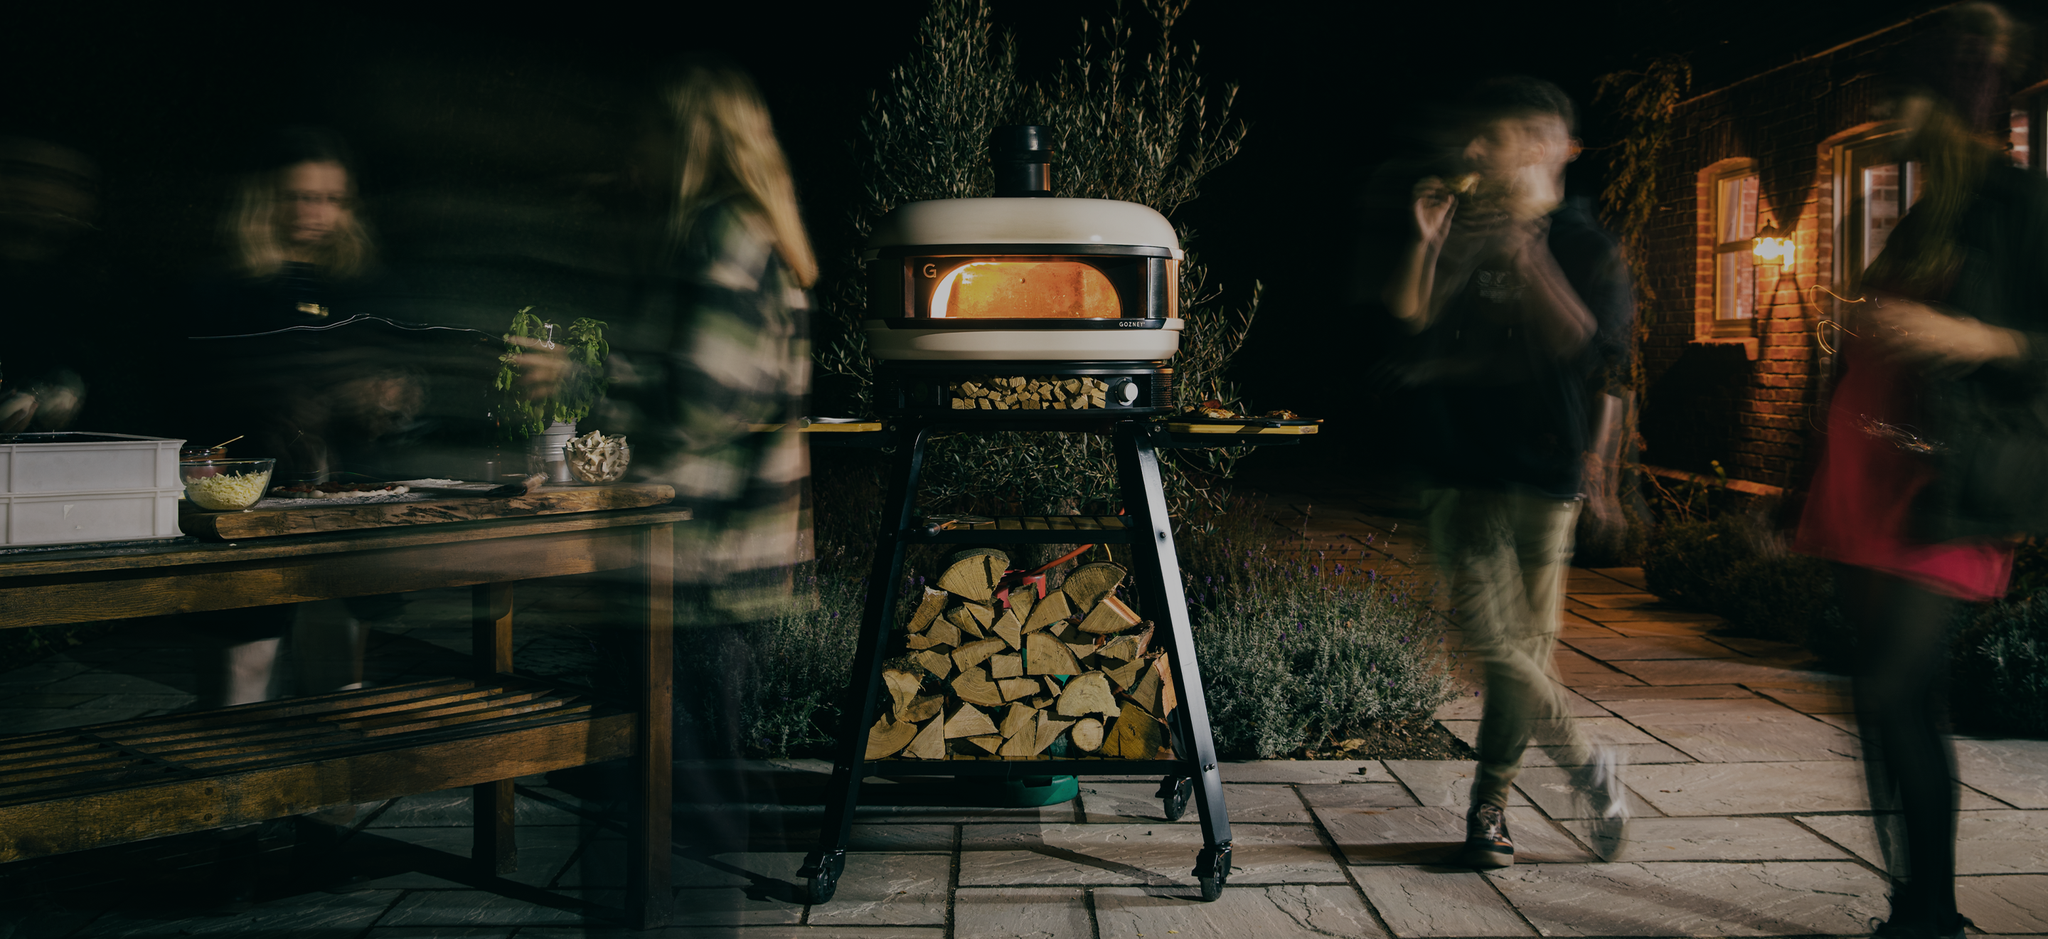 Outdoor pizza party at night with Dome Pizza Oven